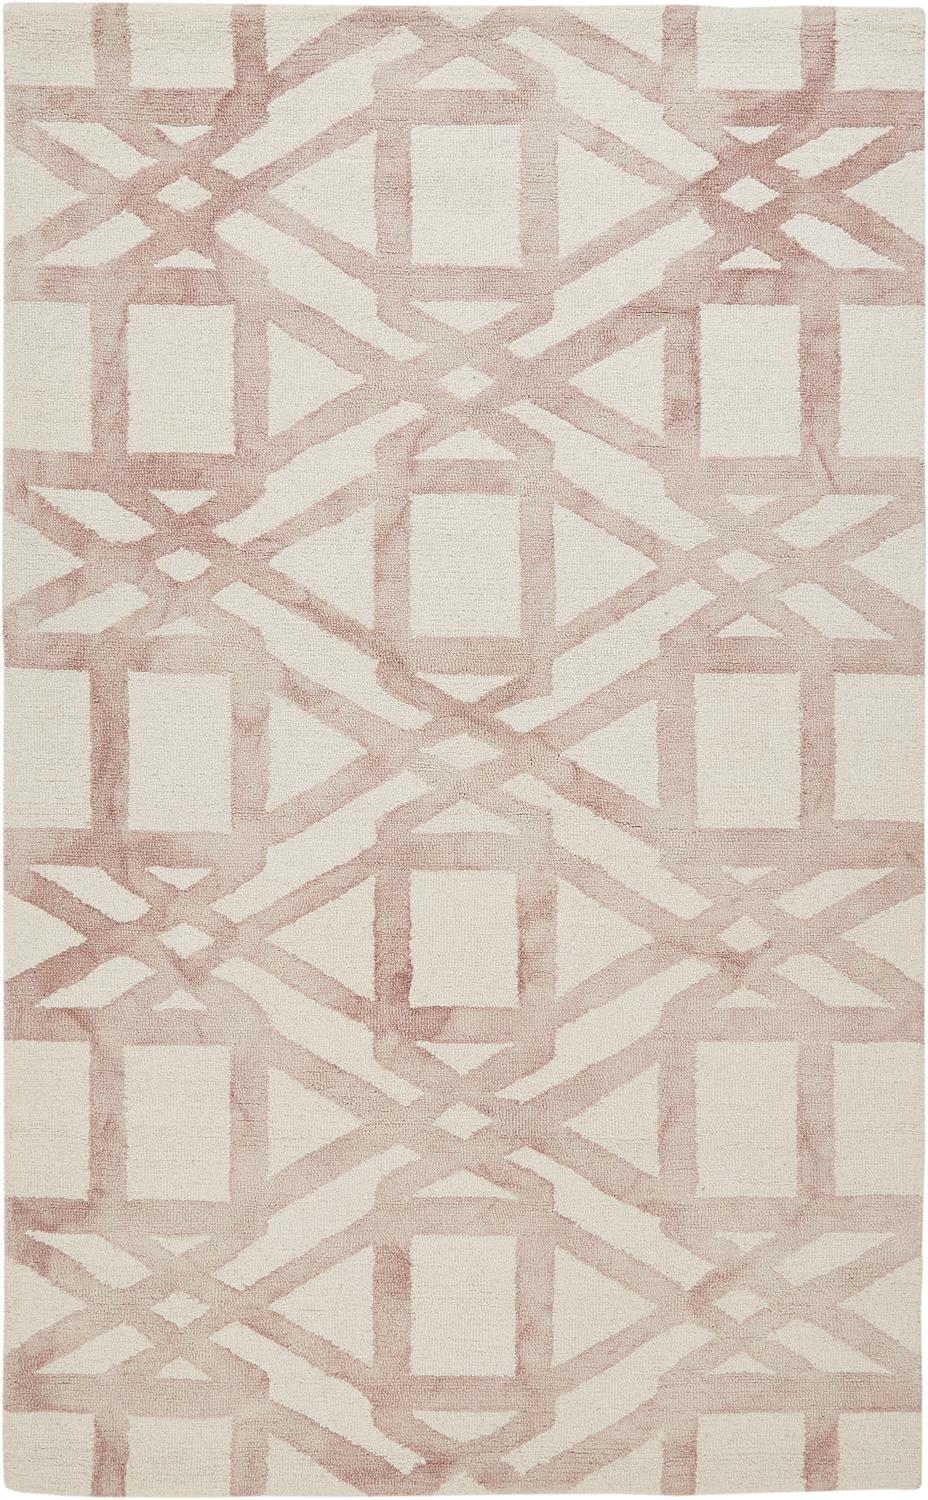 Unbelievable watercolor effect on contemproary rug with muted blush color tone - Santa Clara Furniture Store